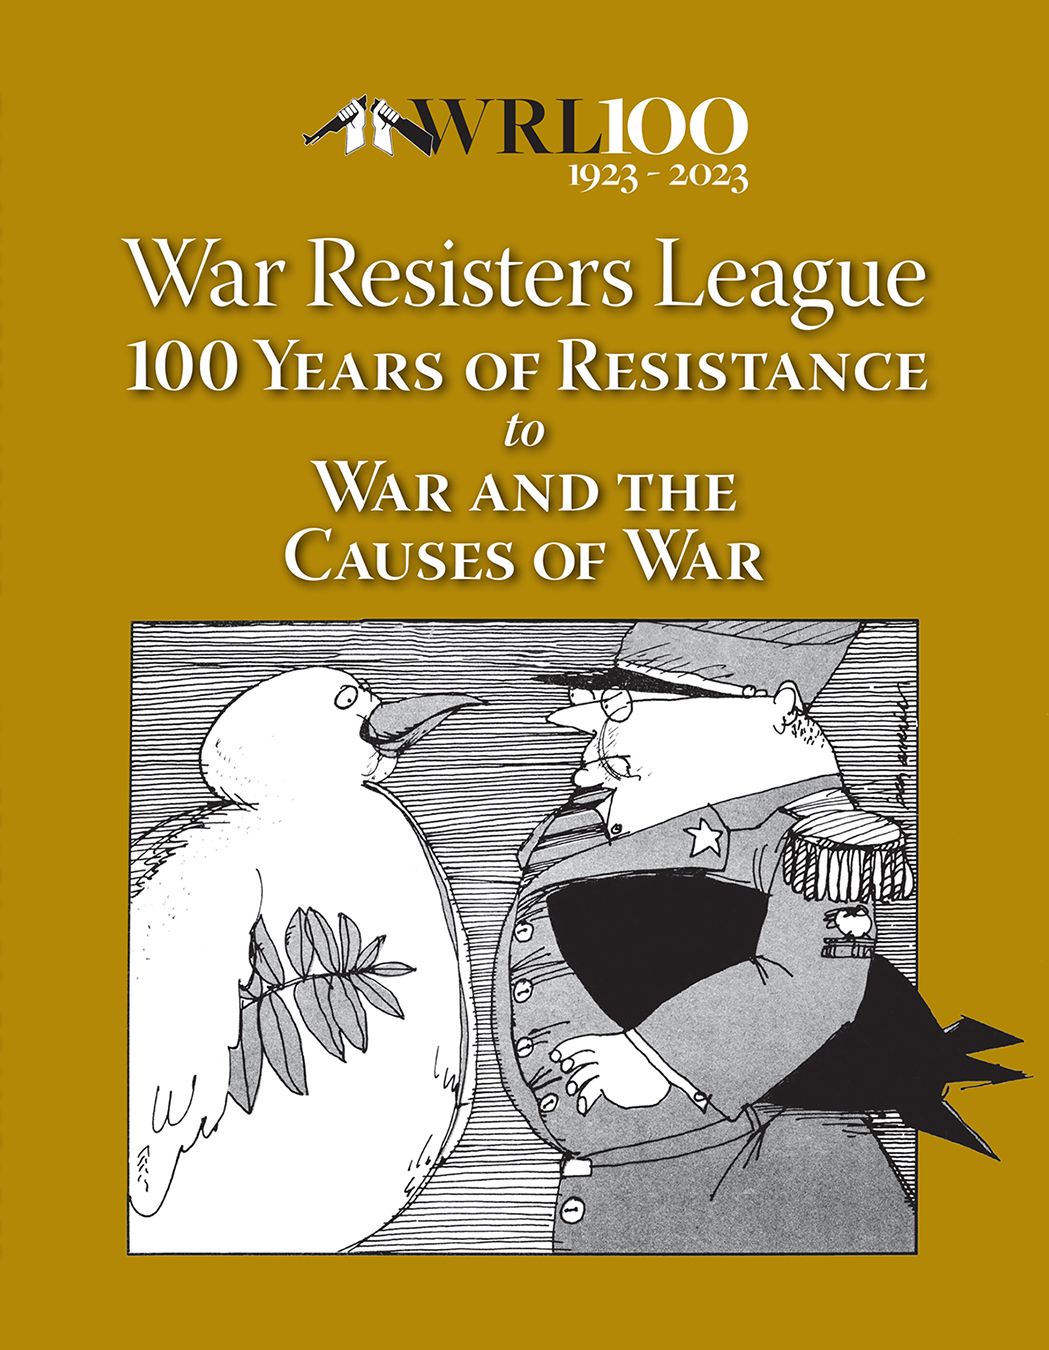 War Resisters League: 100 Years of Resistance to War and the Causes of War